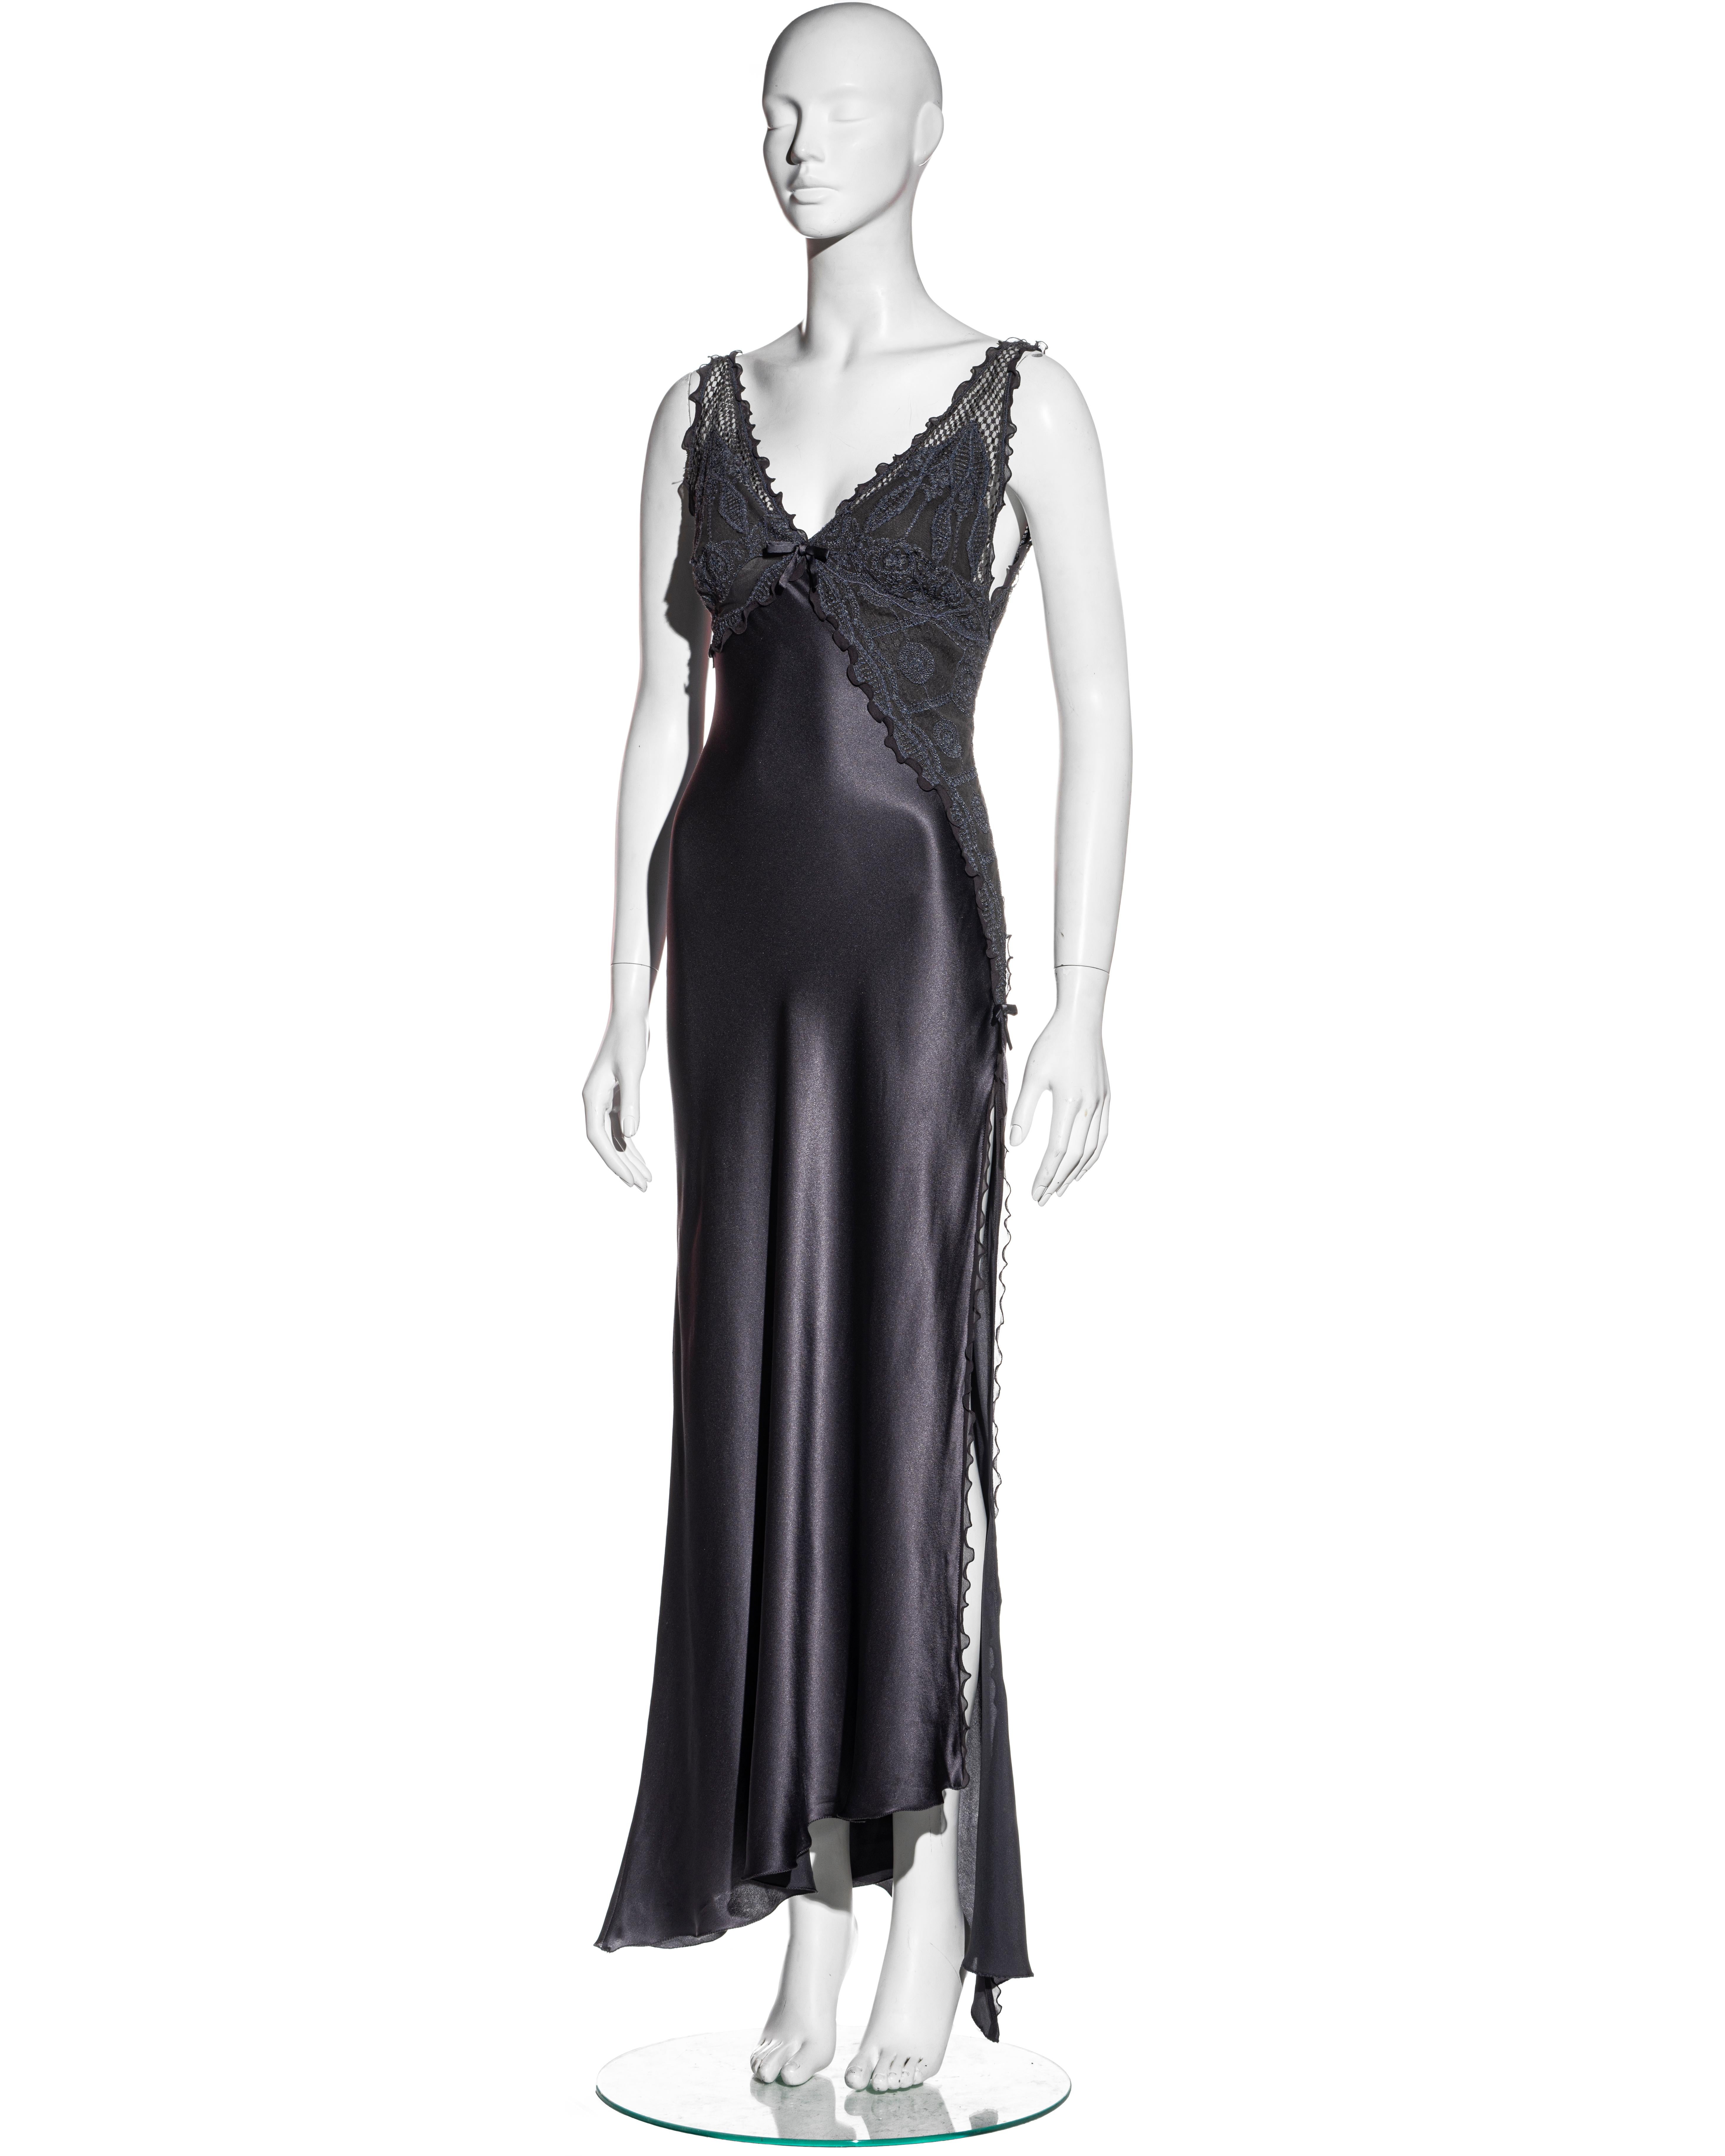 1990s gianni versace black silk chiffon & lace lingerie gown with high slit